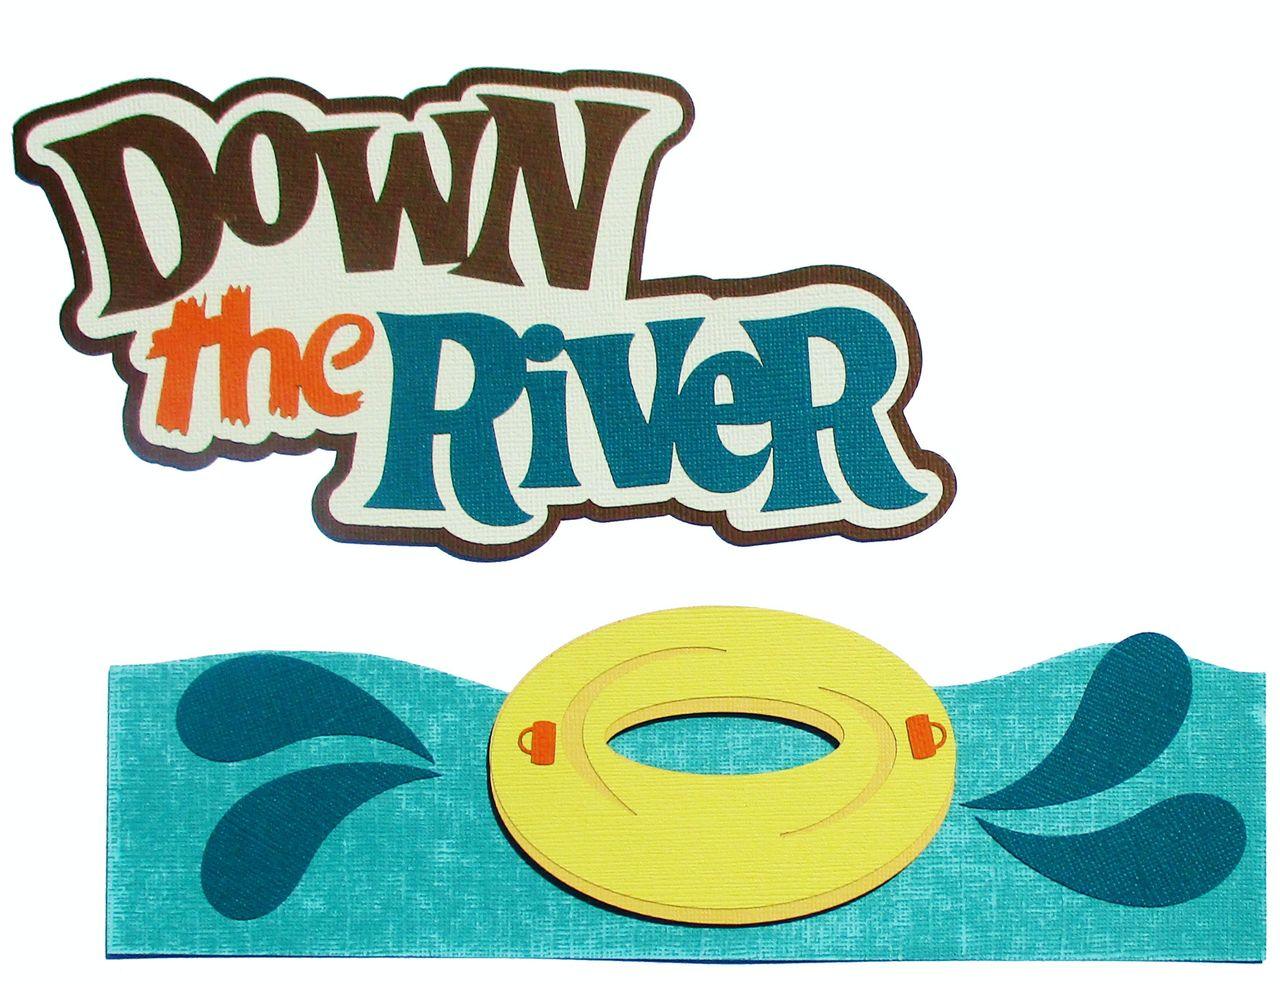 Down The River Title Fully-Assembled 7 x 9 Laser Cut Scrapbook Embellishment by SSC Laser Designs